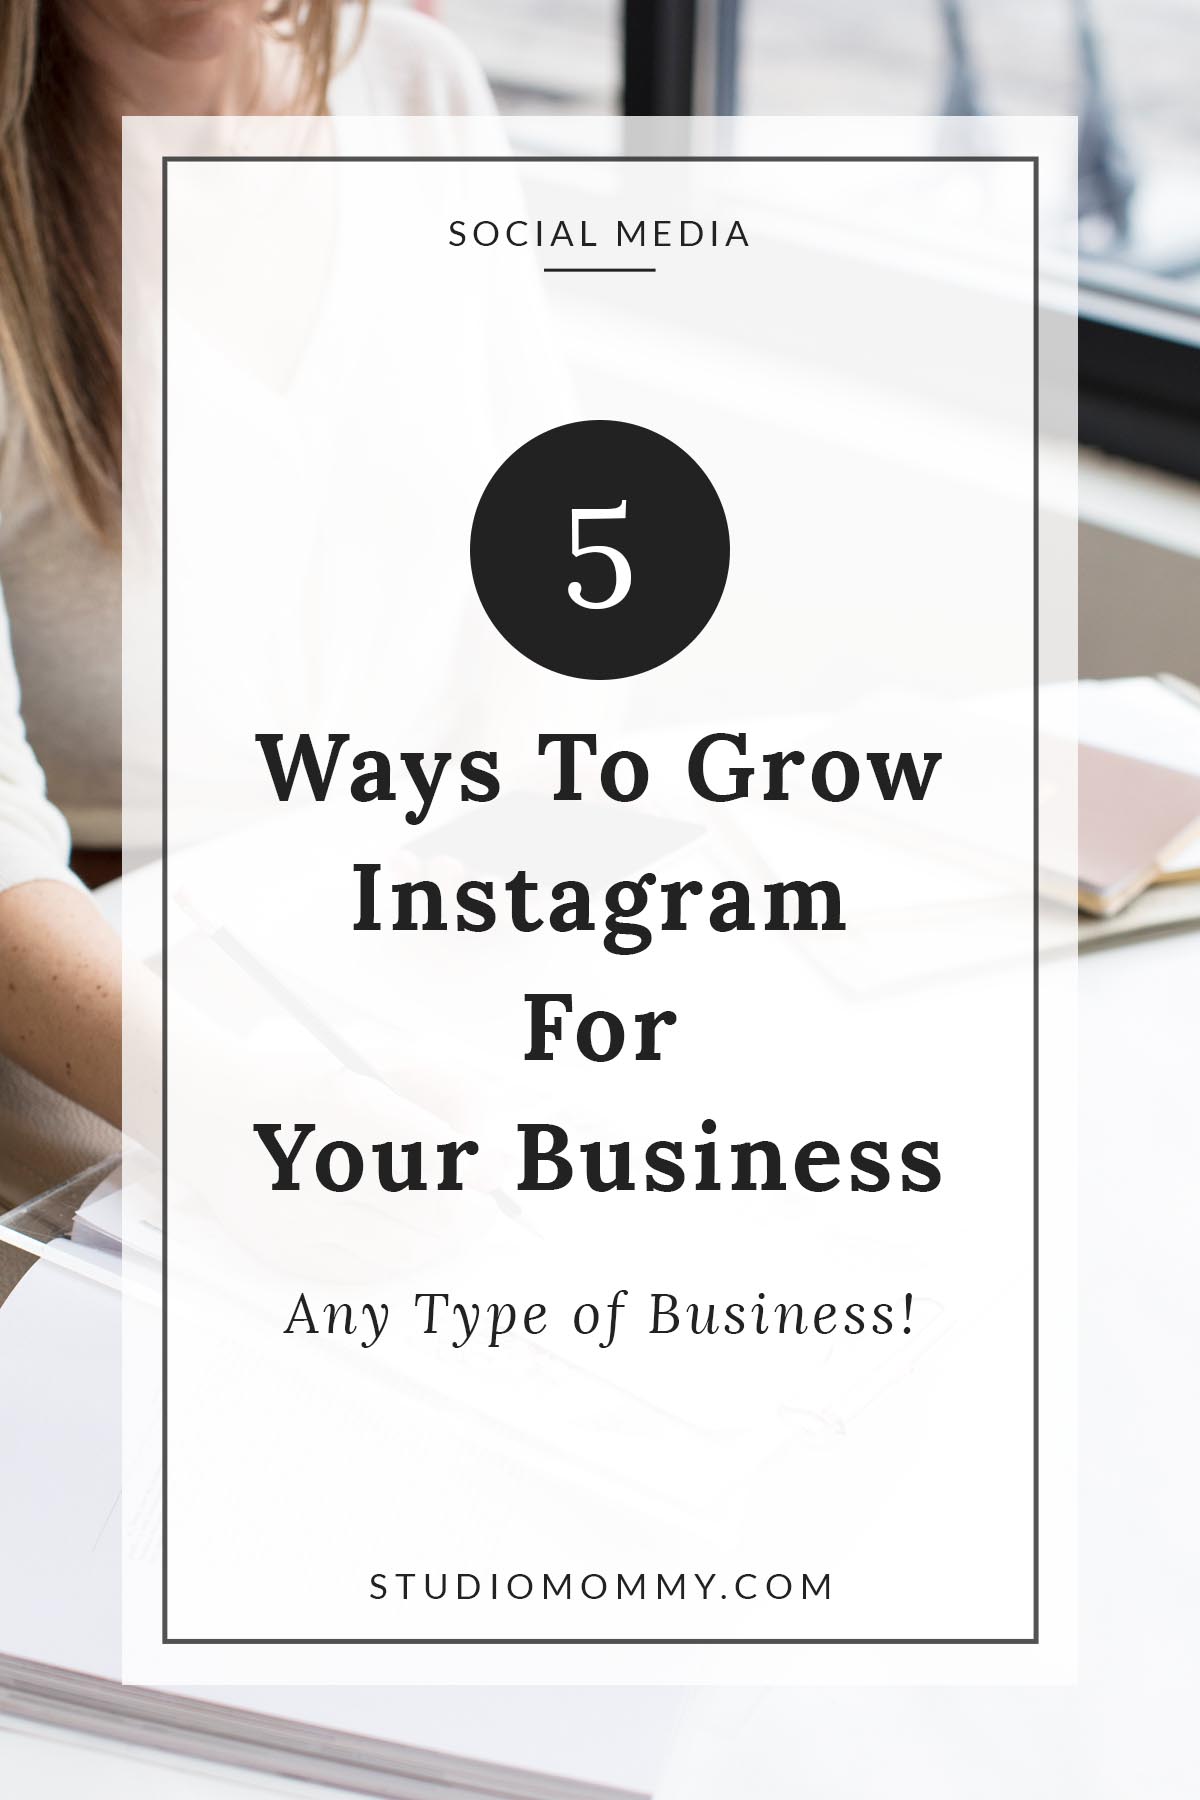 Grow Instagram for your Business - Instagram has got it going on! It is the fastest growing social network out there. As a matter of fact, Statista reported Instagram reached one billion active users this past June. So if you’re not using Instagram to promote your business, you are seriously missing out. What I love about Instagram is that you can use it to promote any type of business: blogging businesses, online businesses, ecommerce, even brick and mortar businesses are using the social platform. #instagrammarketing #businessmarketing #hashtags #instagramstories #directmessaging #instagramlive